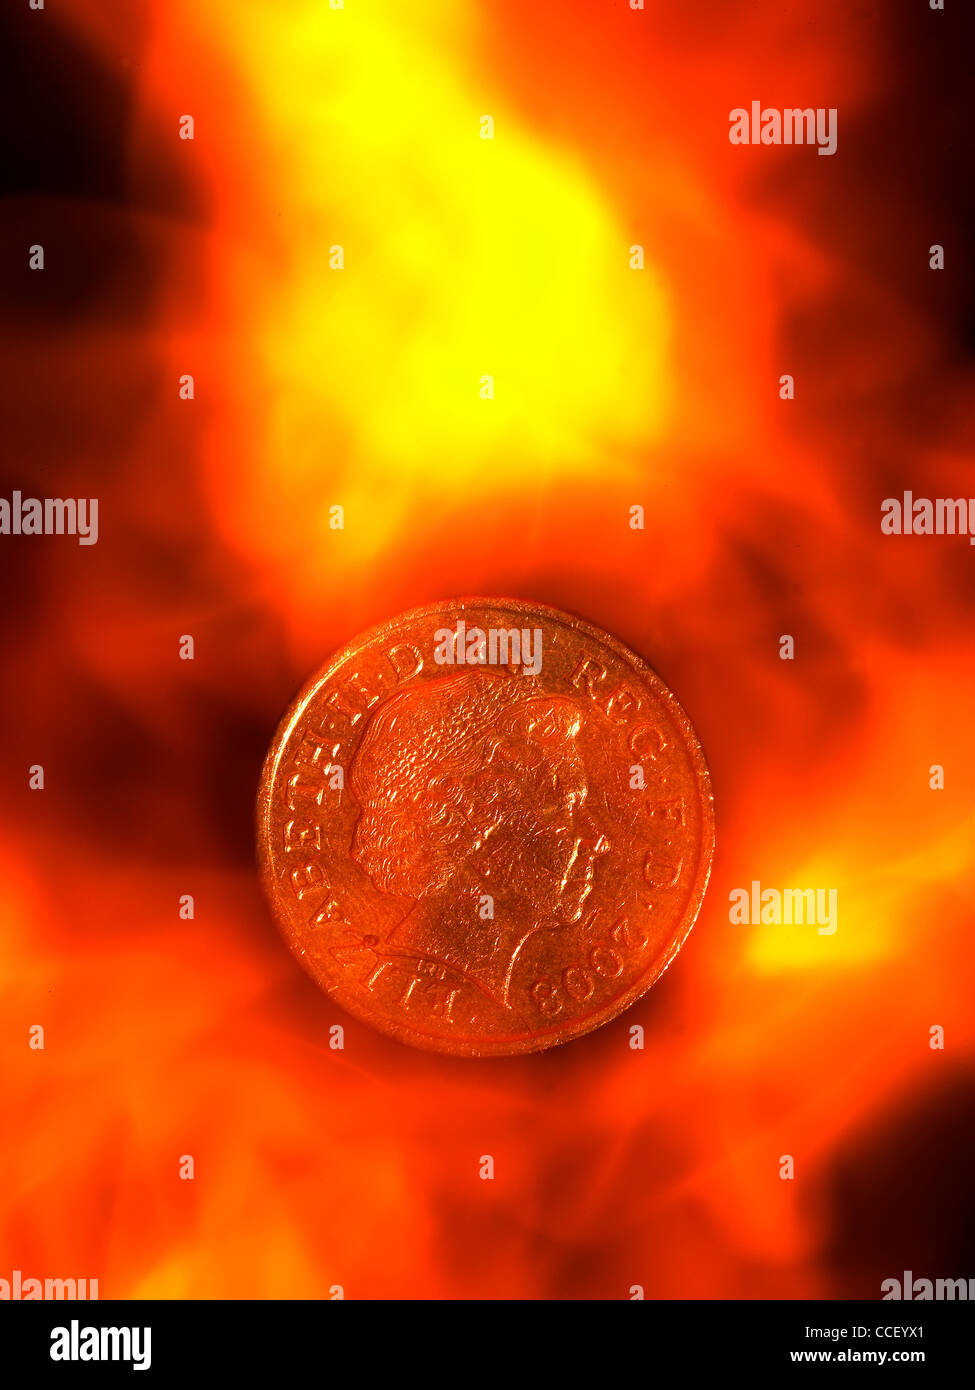 A one pound coin amongst flames Stock Photo